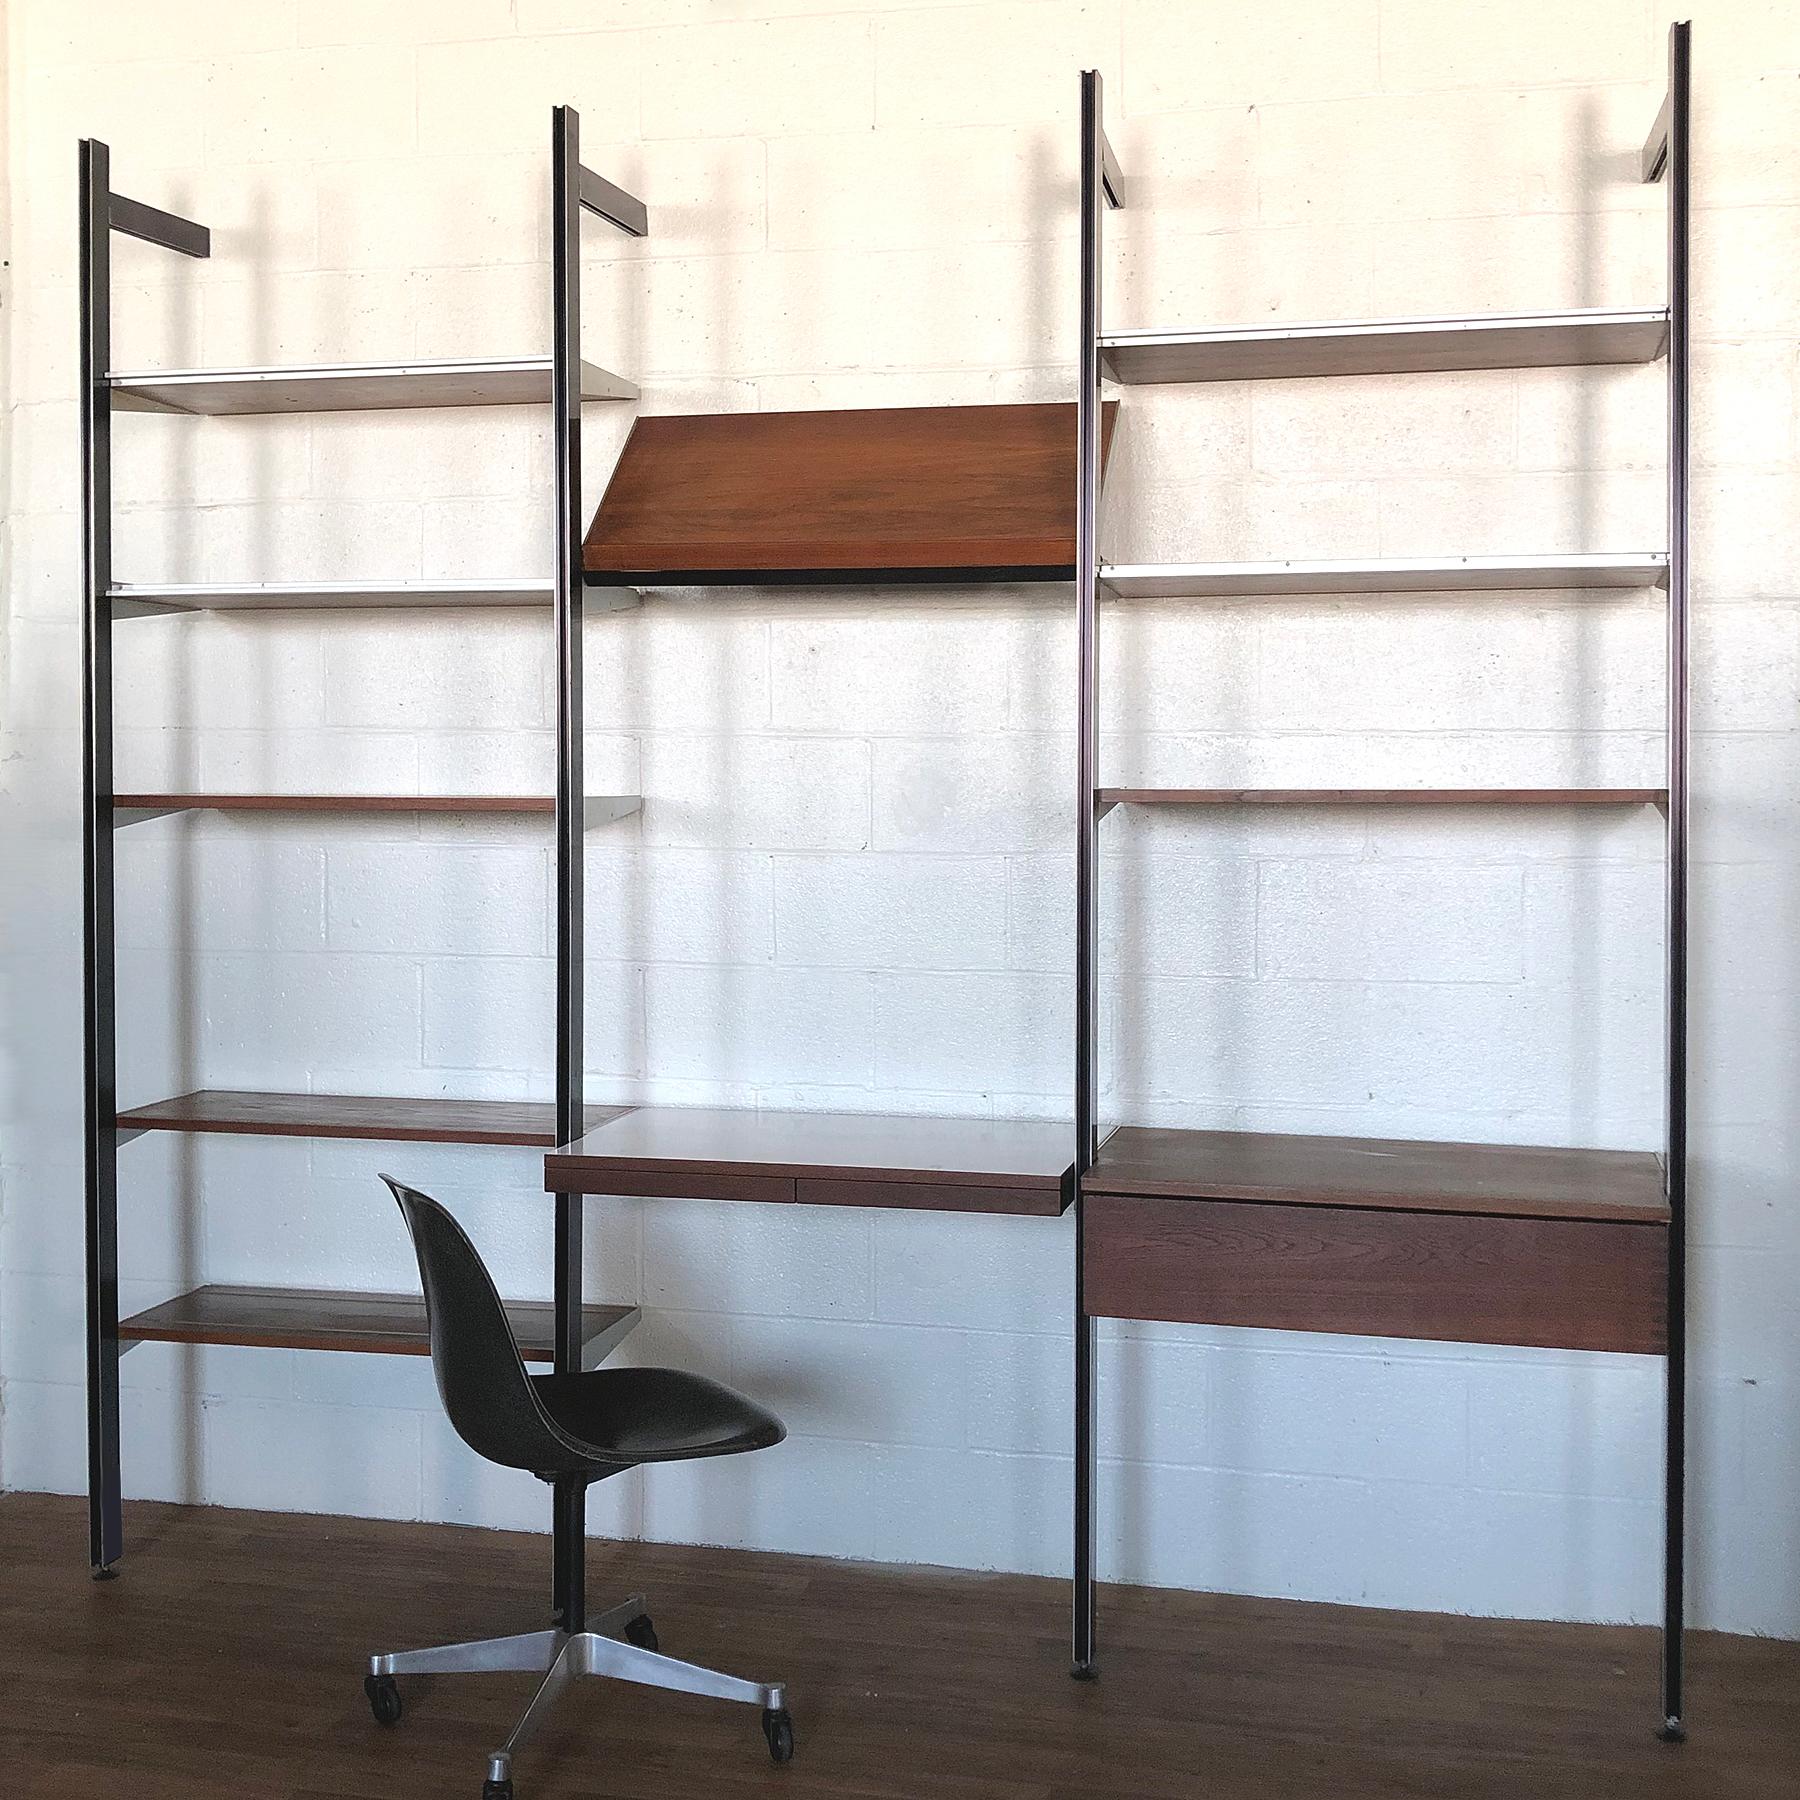 This CSS shelving unit is an excellent example. The beautiful design is comprised of four tension-mounted uprights which support nine teak shelves, a angled magazine shelf, a desktop with two pencil drawers, and a storage drawer with dovetailed